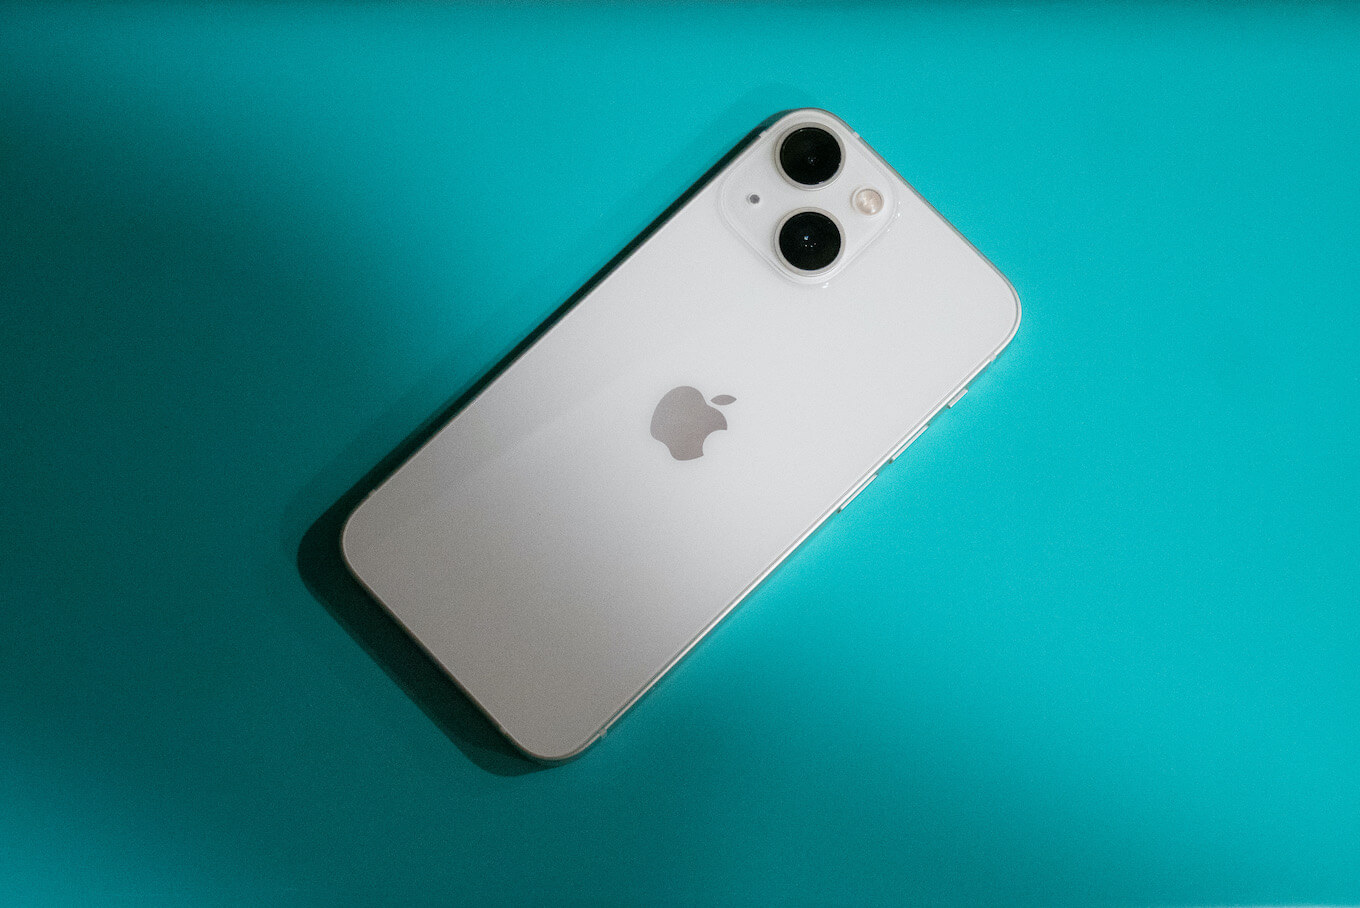 White iPhone 13 Mini on a teal surface